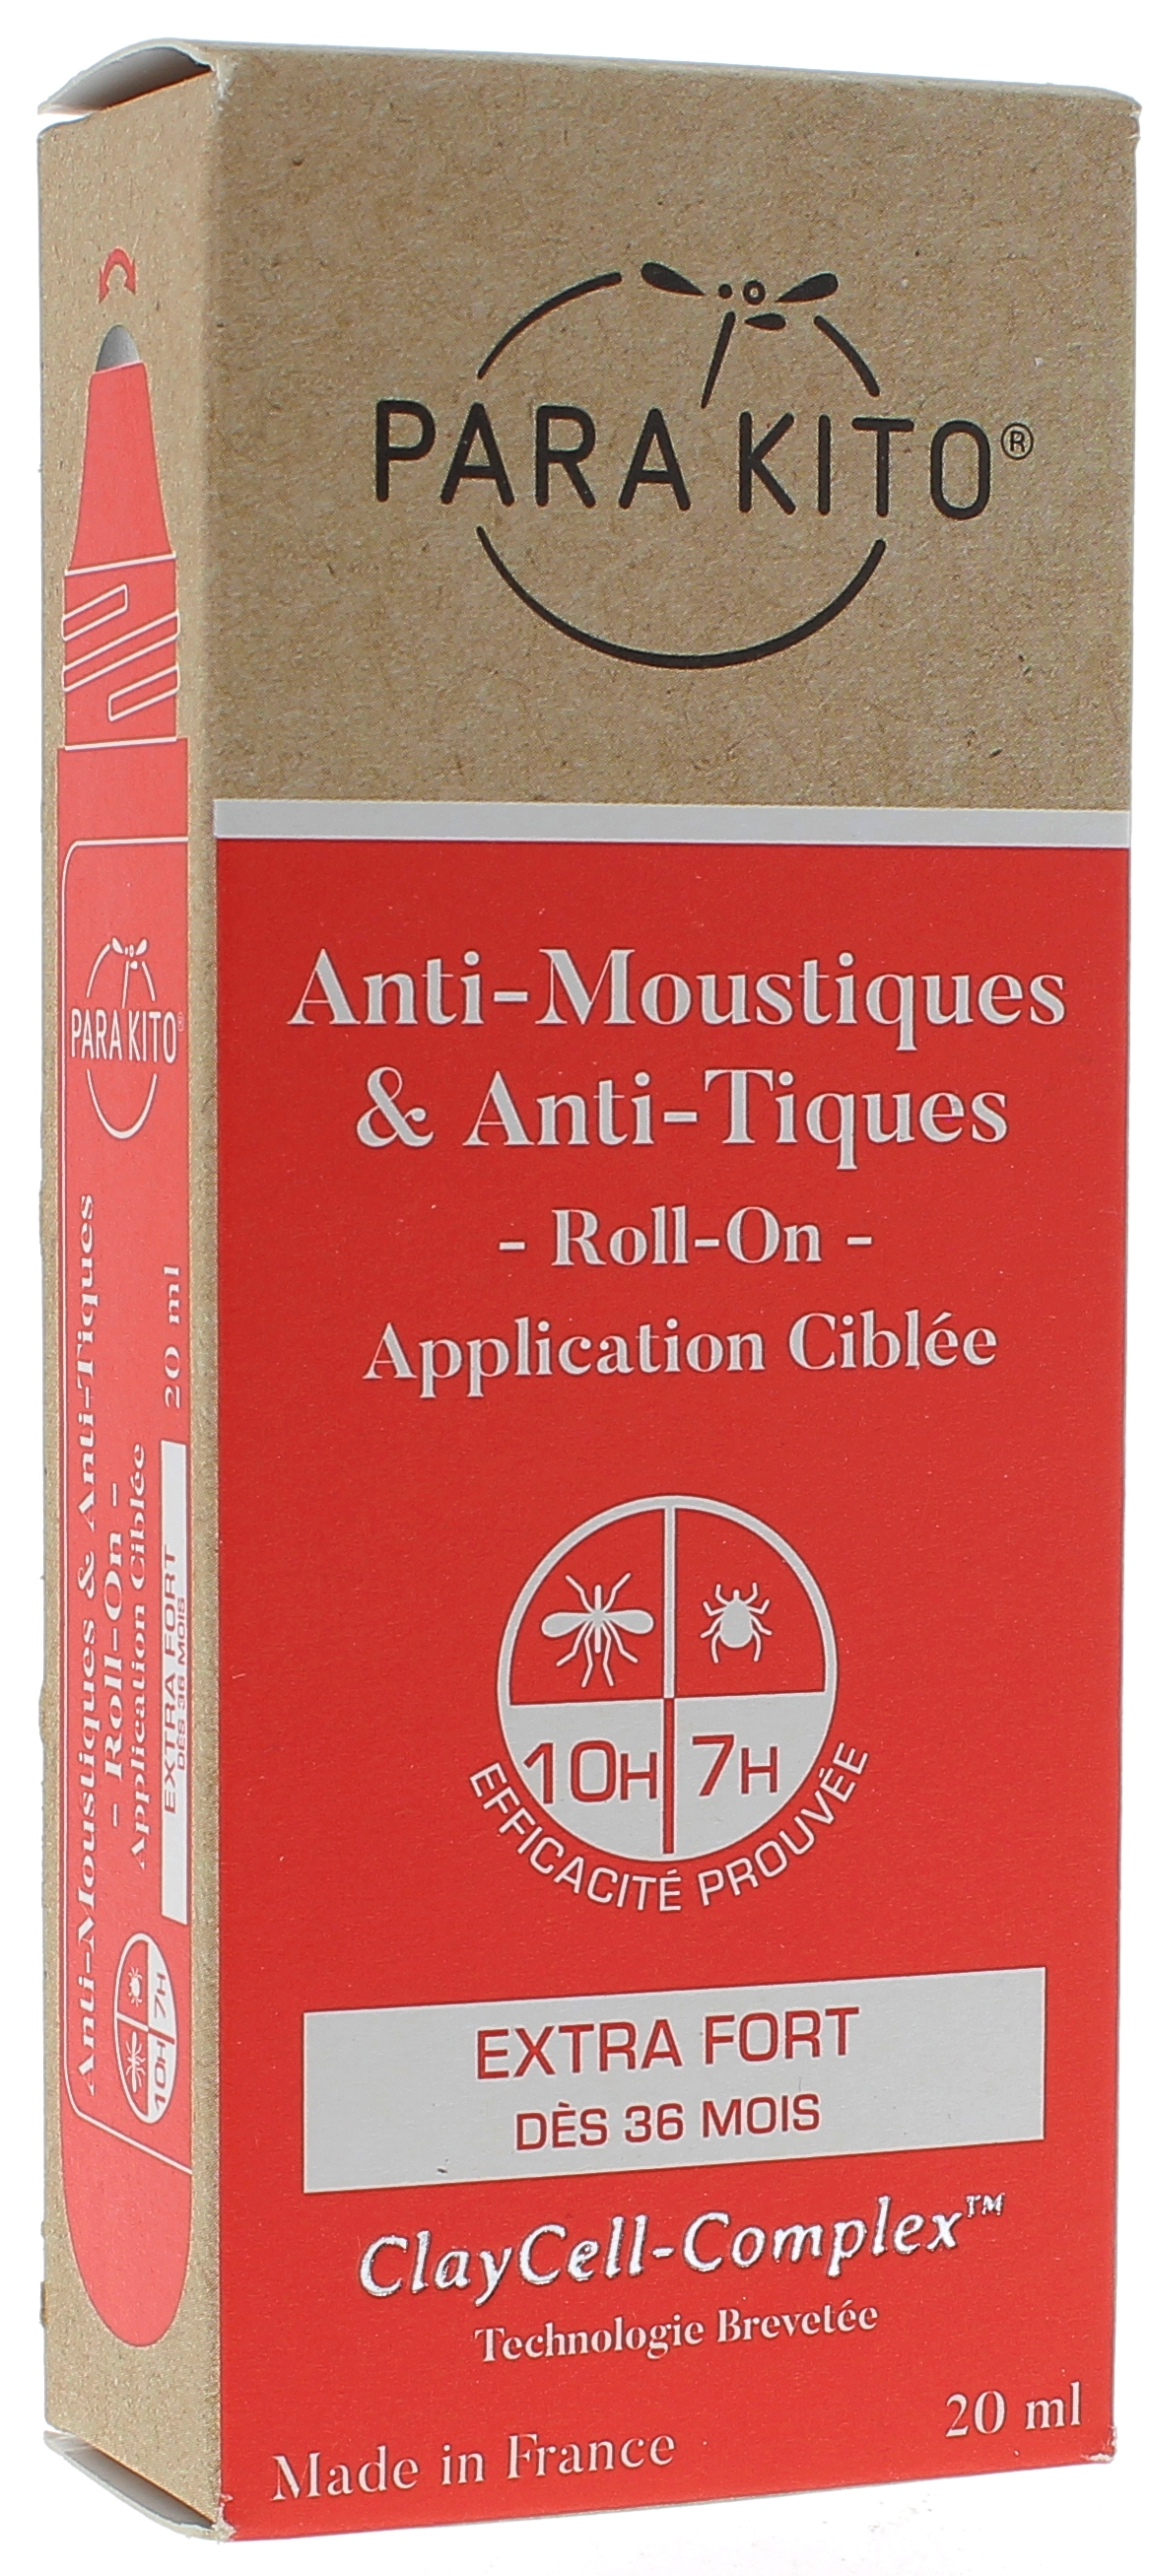 Anti-Moustiques & Anti-Tiques Roll-on Extra Fort Para Kito - Roll-on de 20 ml